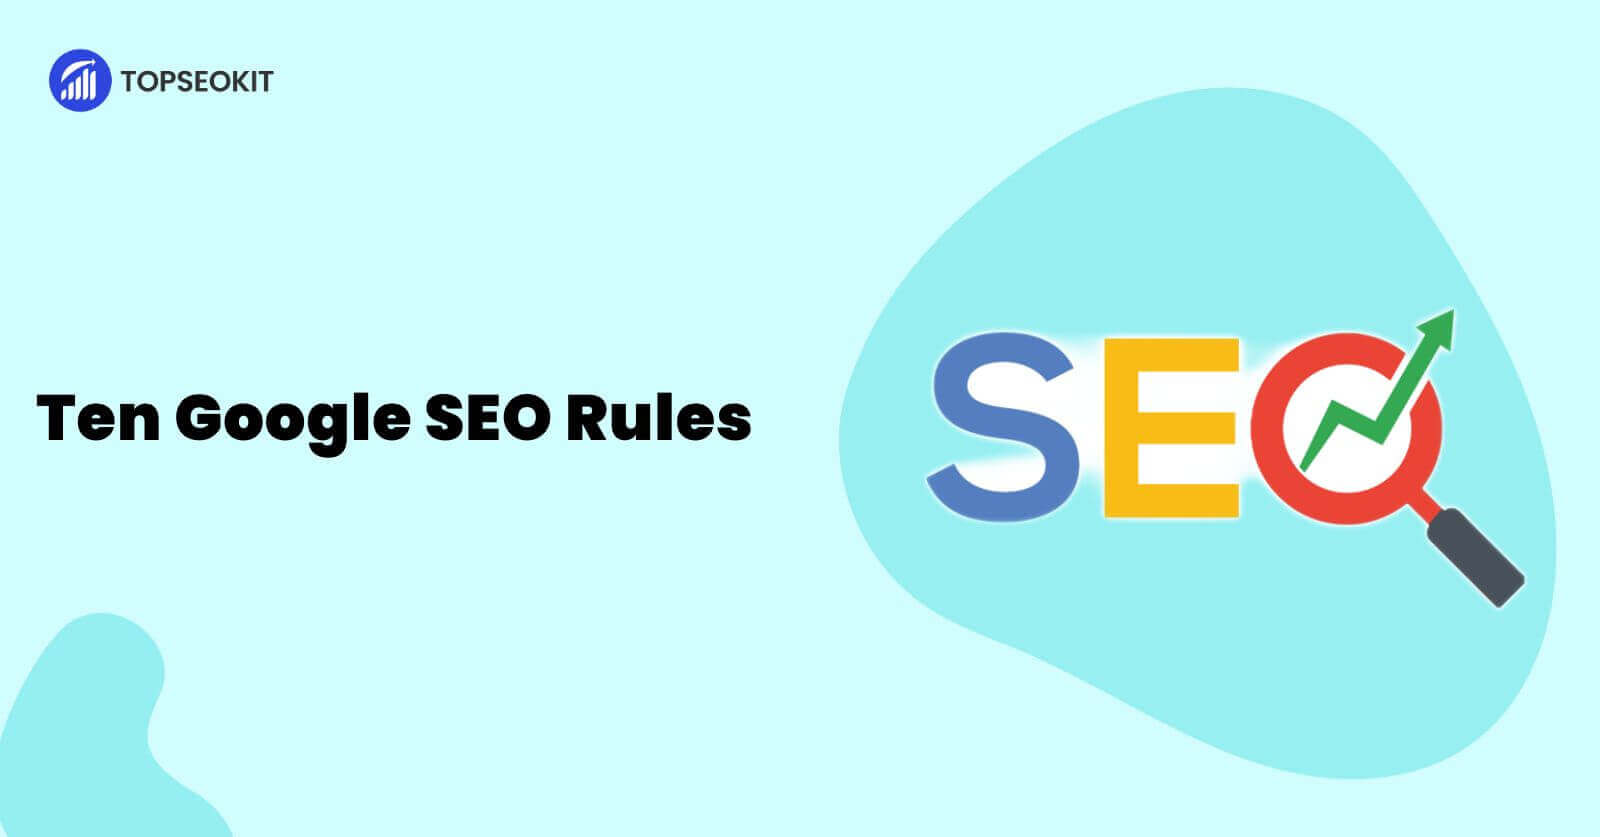 10 Google SEO Rules Every Marketer Should Know in 2023